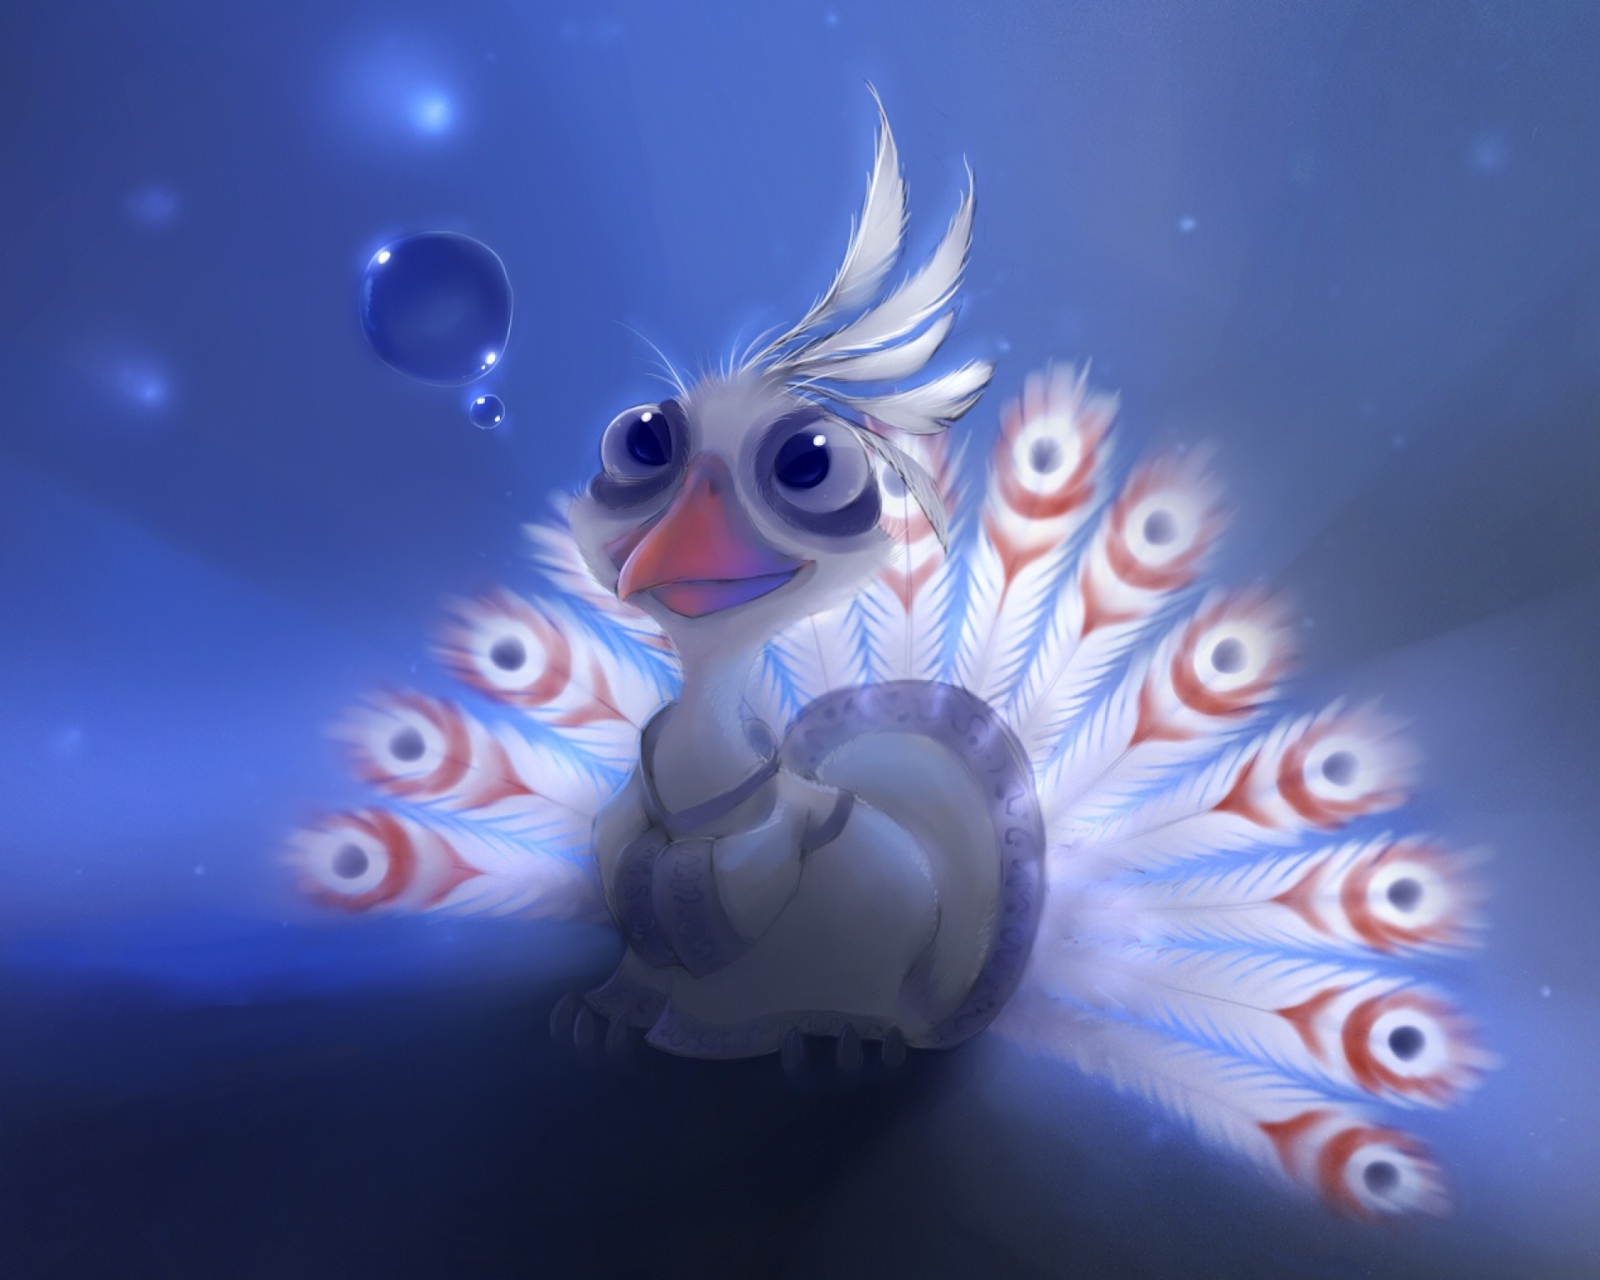 White Peacock Painting wallpaper 1600x1280